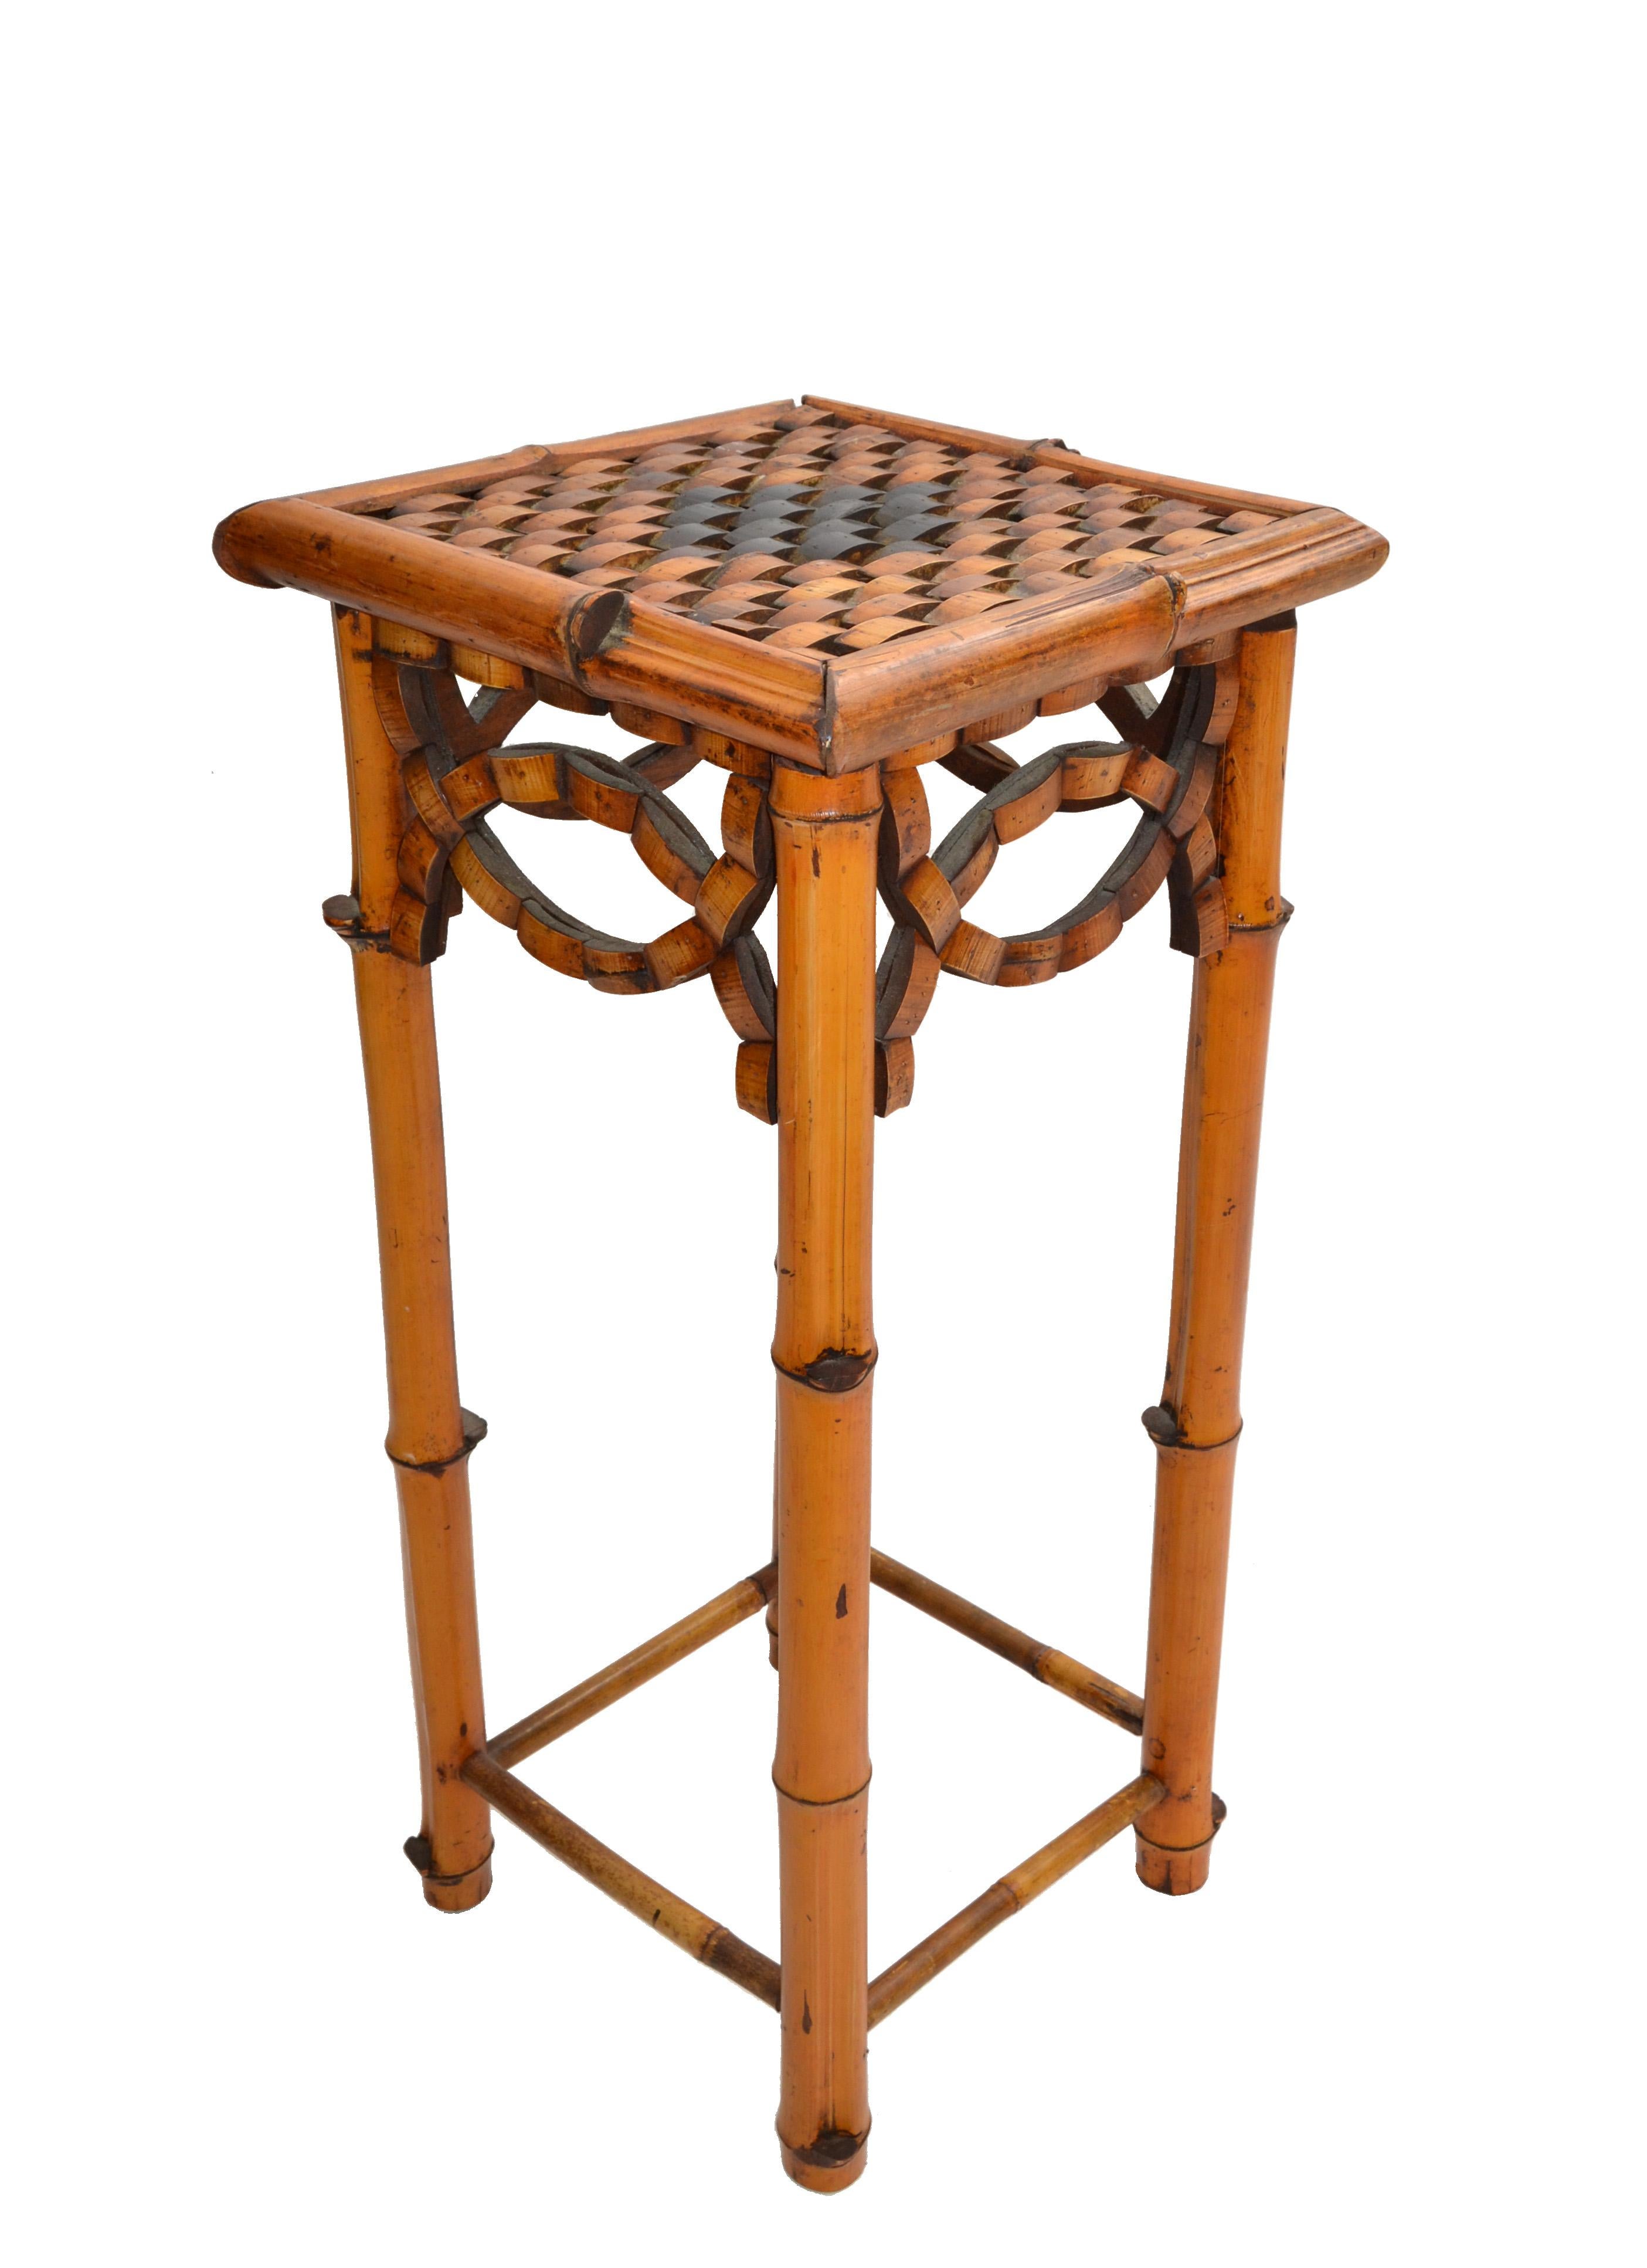 Hand-Crafted Bohemian Handcrafted Mid-Century Modern Bamboo & Rattan Side Table, Plant Stand